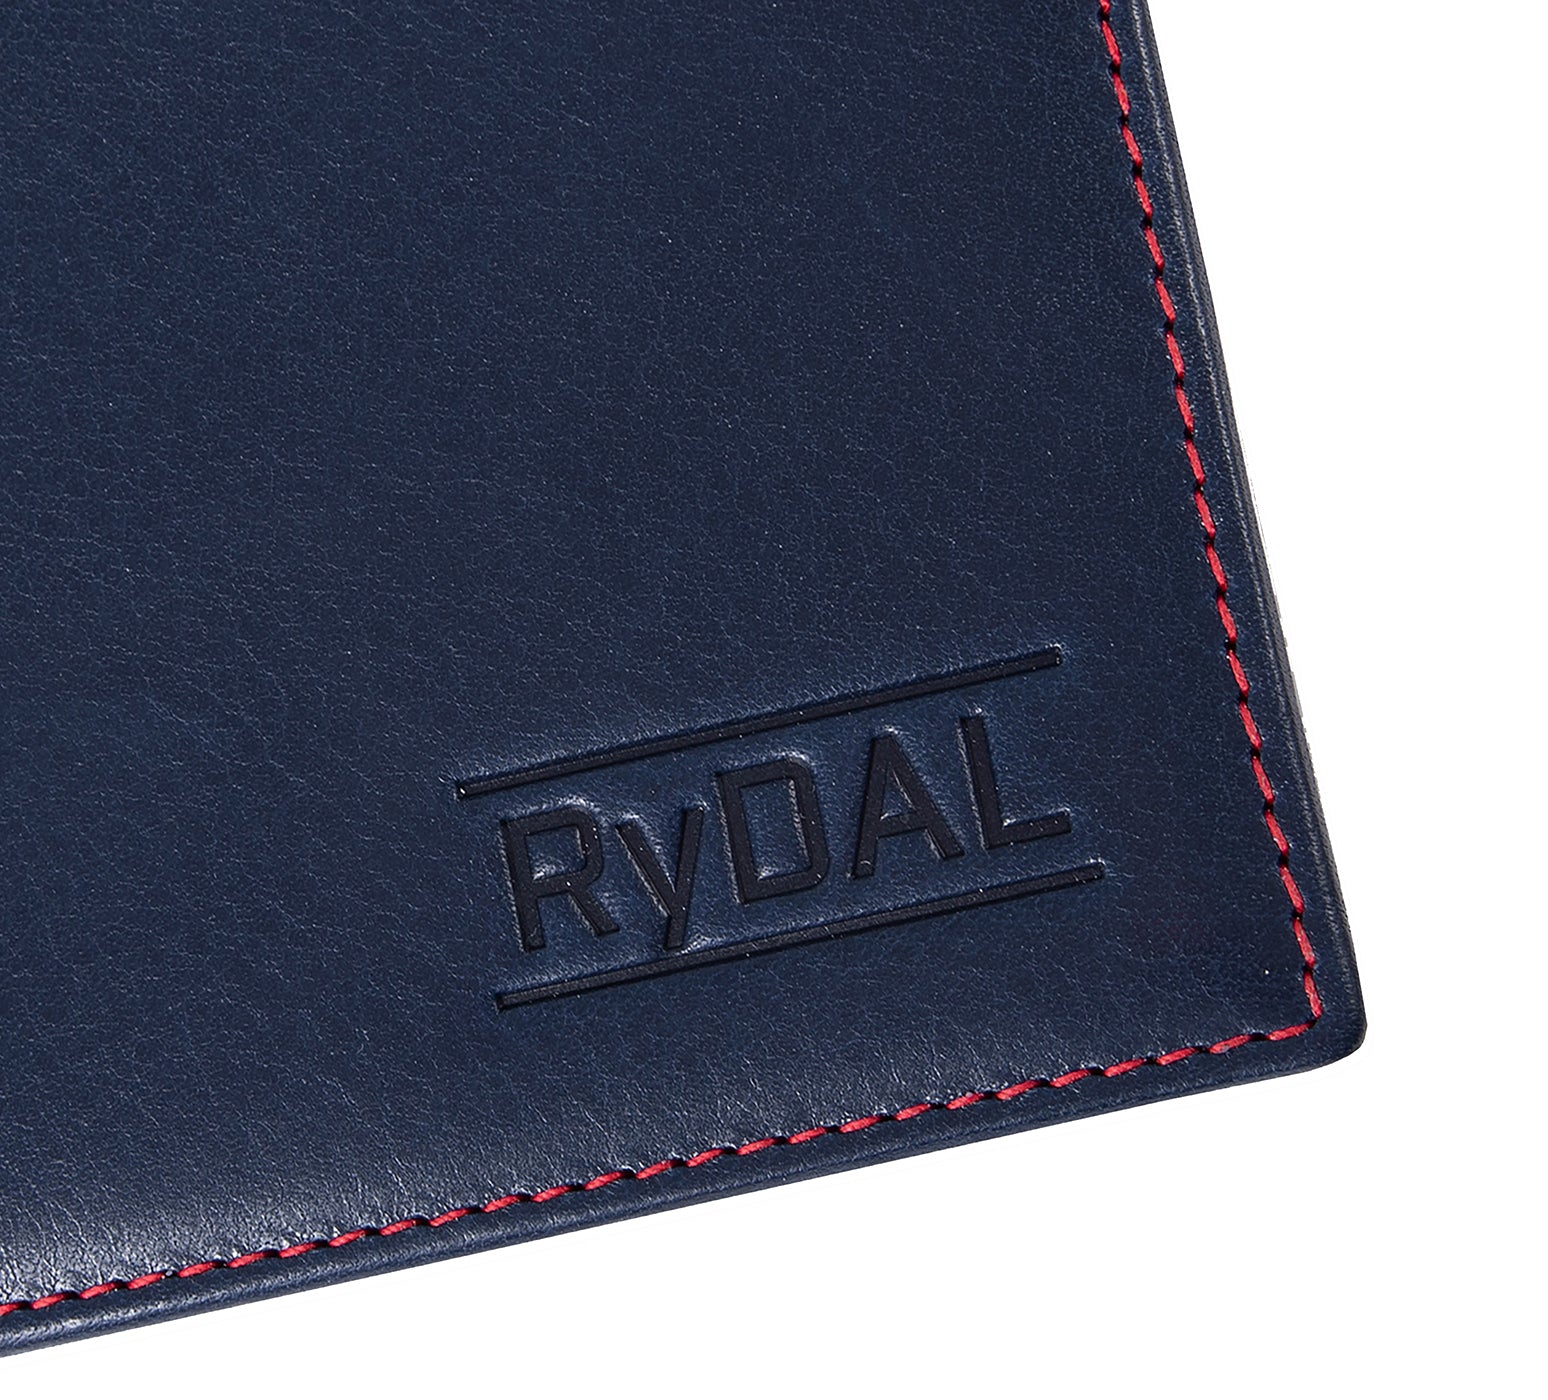 Mens Leather Wallet with Coin Pocket from Rydal in 'Royal Blue/Red' showing close up of logo.